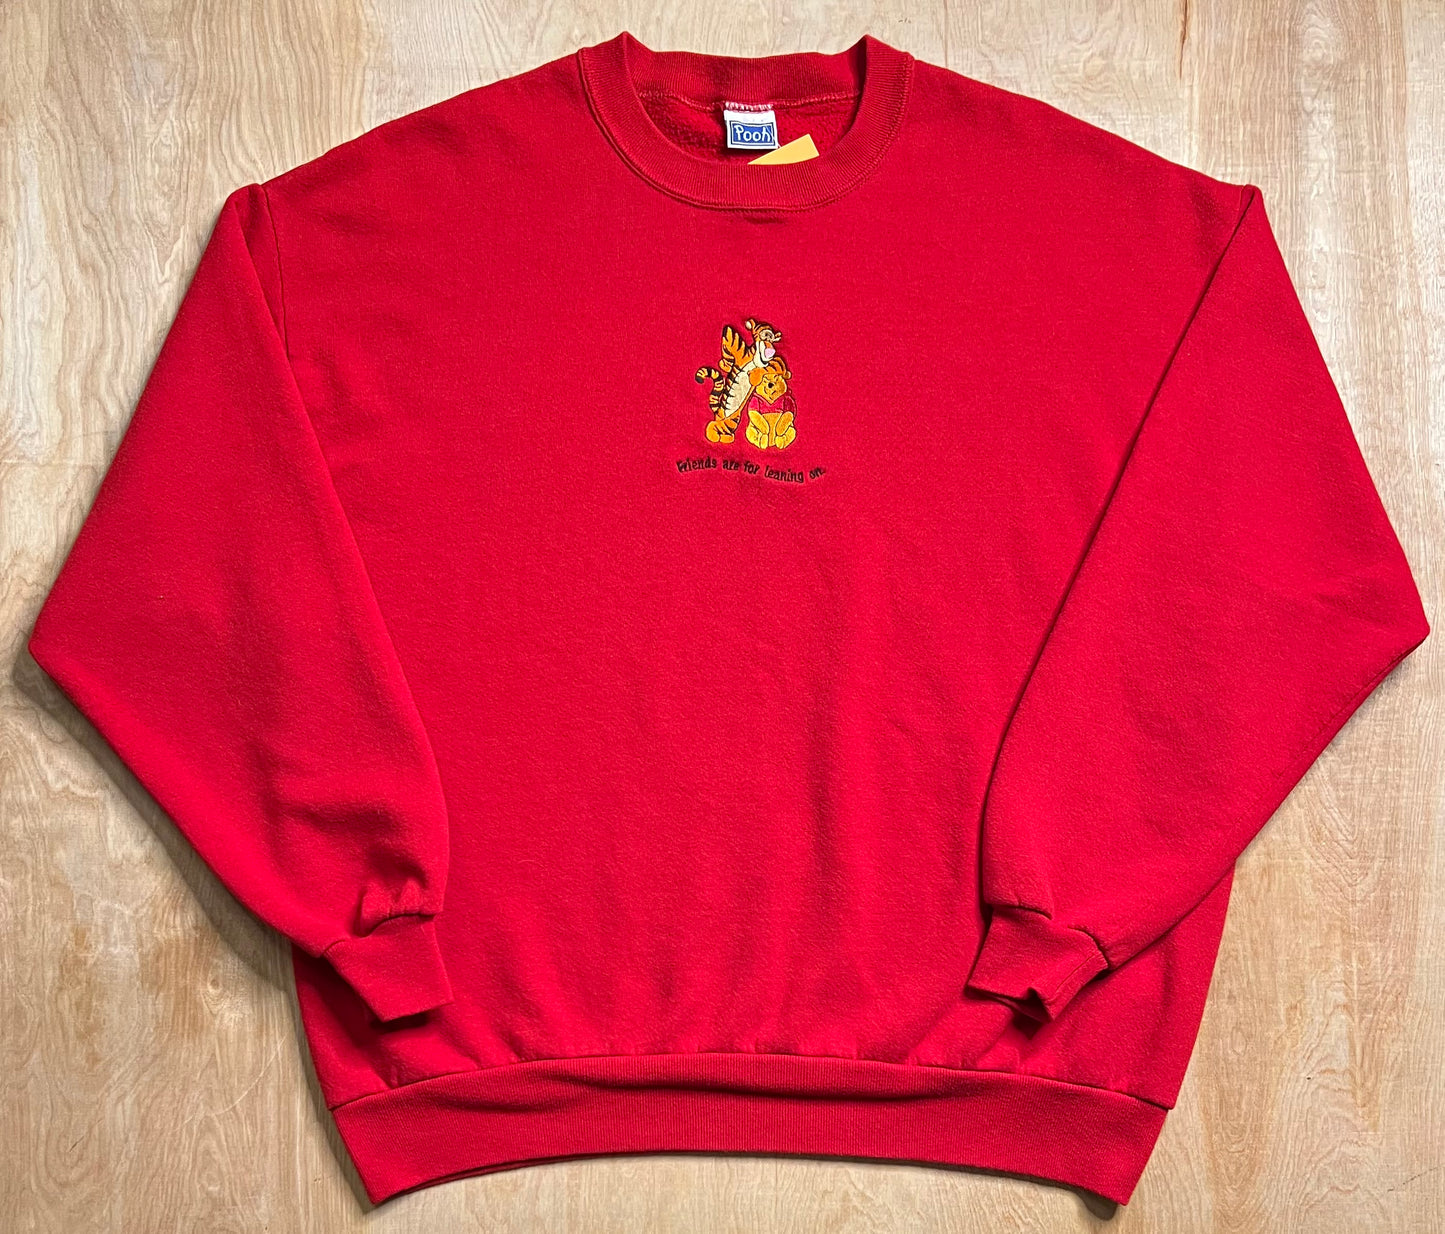 Vintage Winnie the Pooh "Friends are for Leaning on" Crewneck